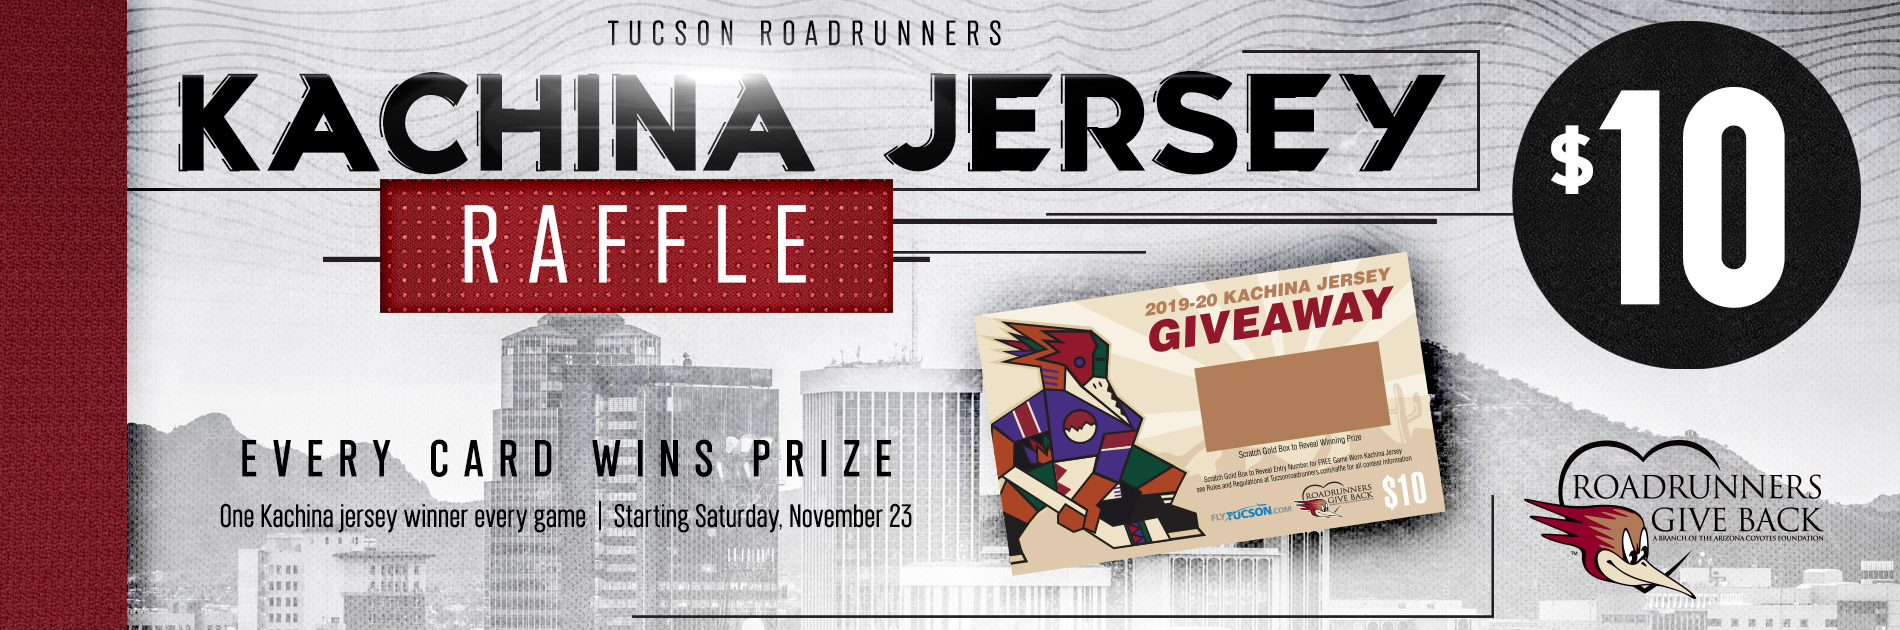 Tucson Roadrunners - Another T-Mobile Kachina Saturday is upon us!